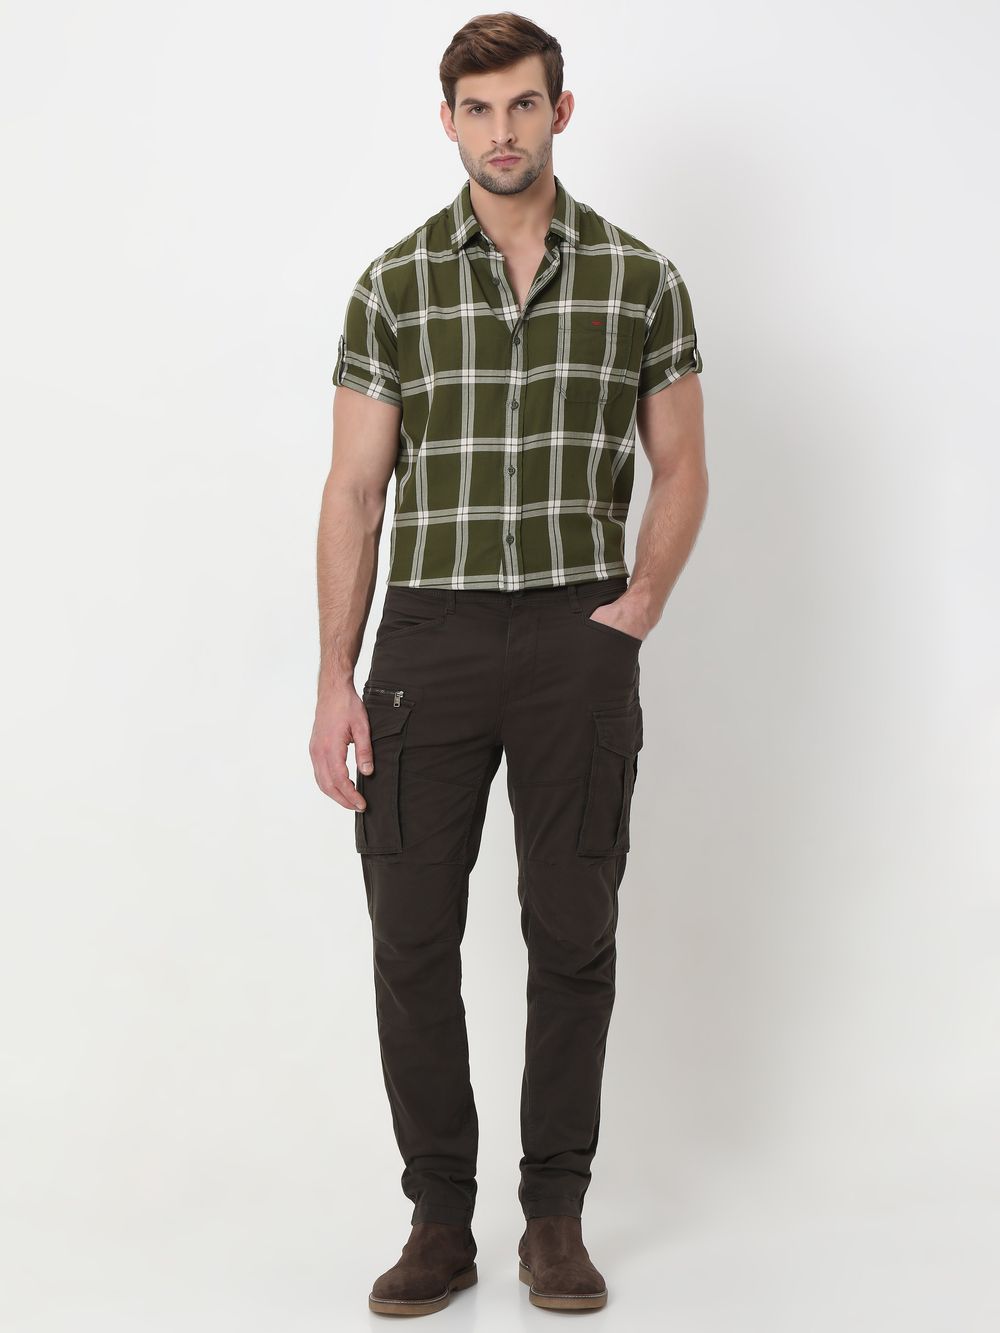 Olive & White Large Check Slim Fit Casual Shirt